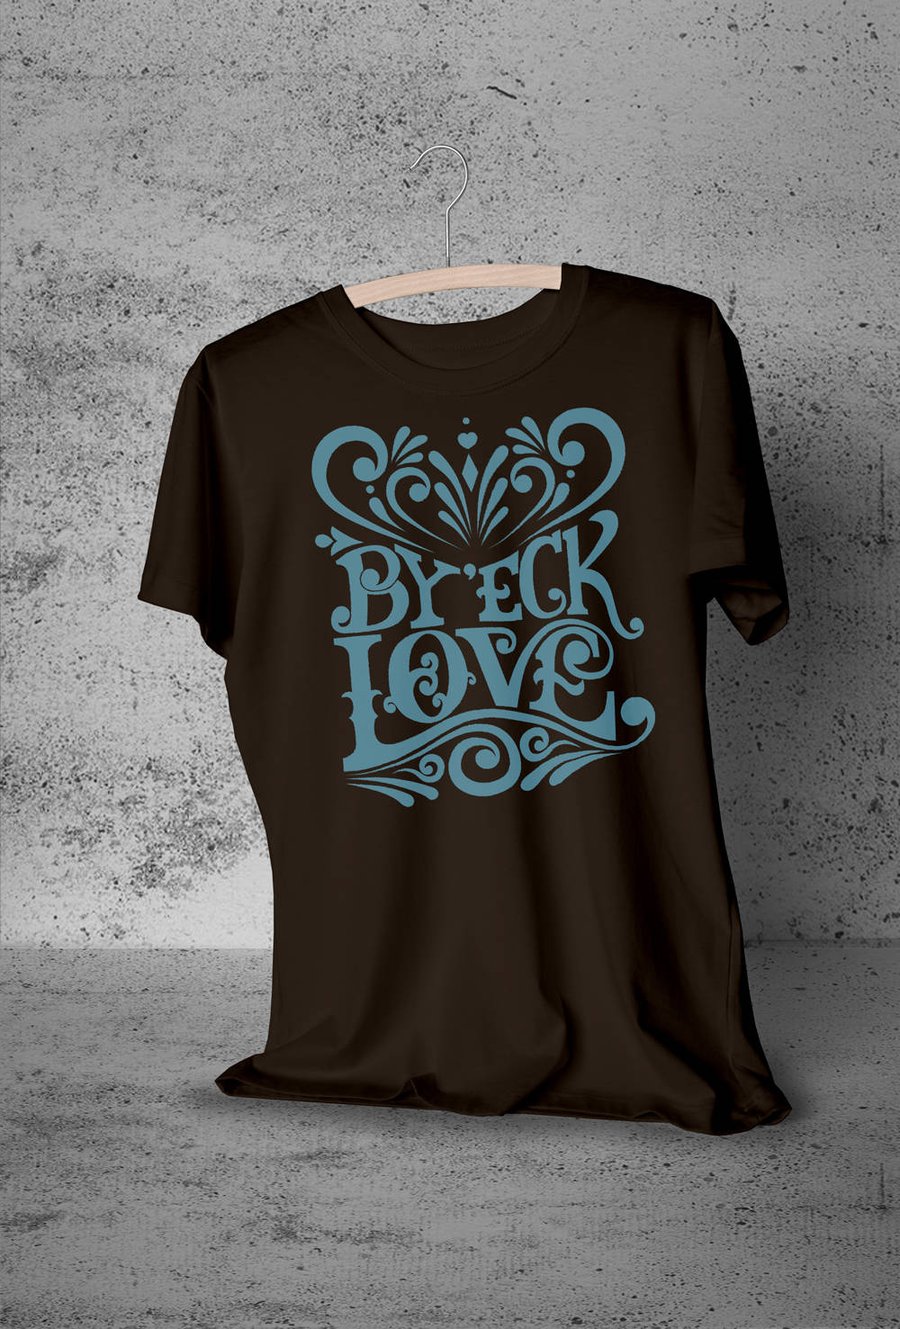 Men's type t-shirt. By 'eck Love- Yorkshire Typography T-shirt. Graphic male top